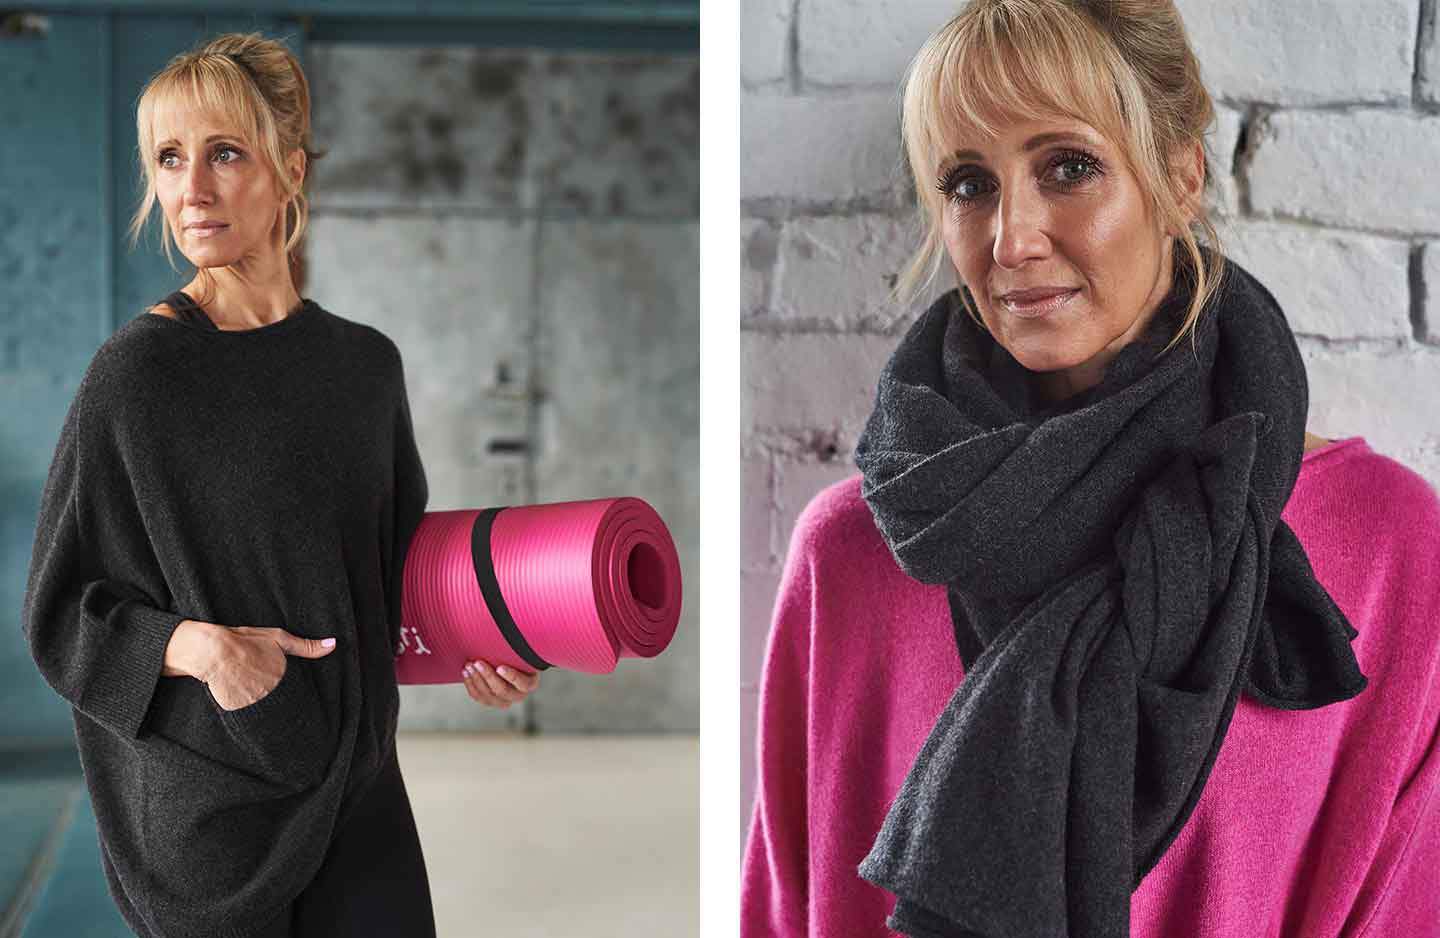 Women standing in a grey oversized charcoal poncho with hand in pocket carrying a pink yoga mat and women standing against white brick wall in pink cashmere jumper with grey cashmere wrap wrapped around neck